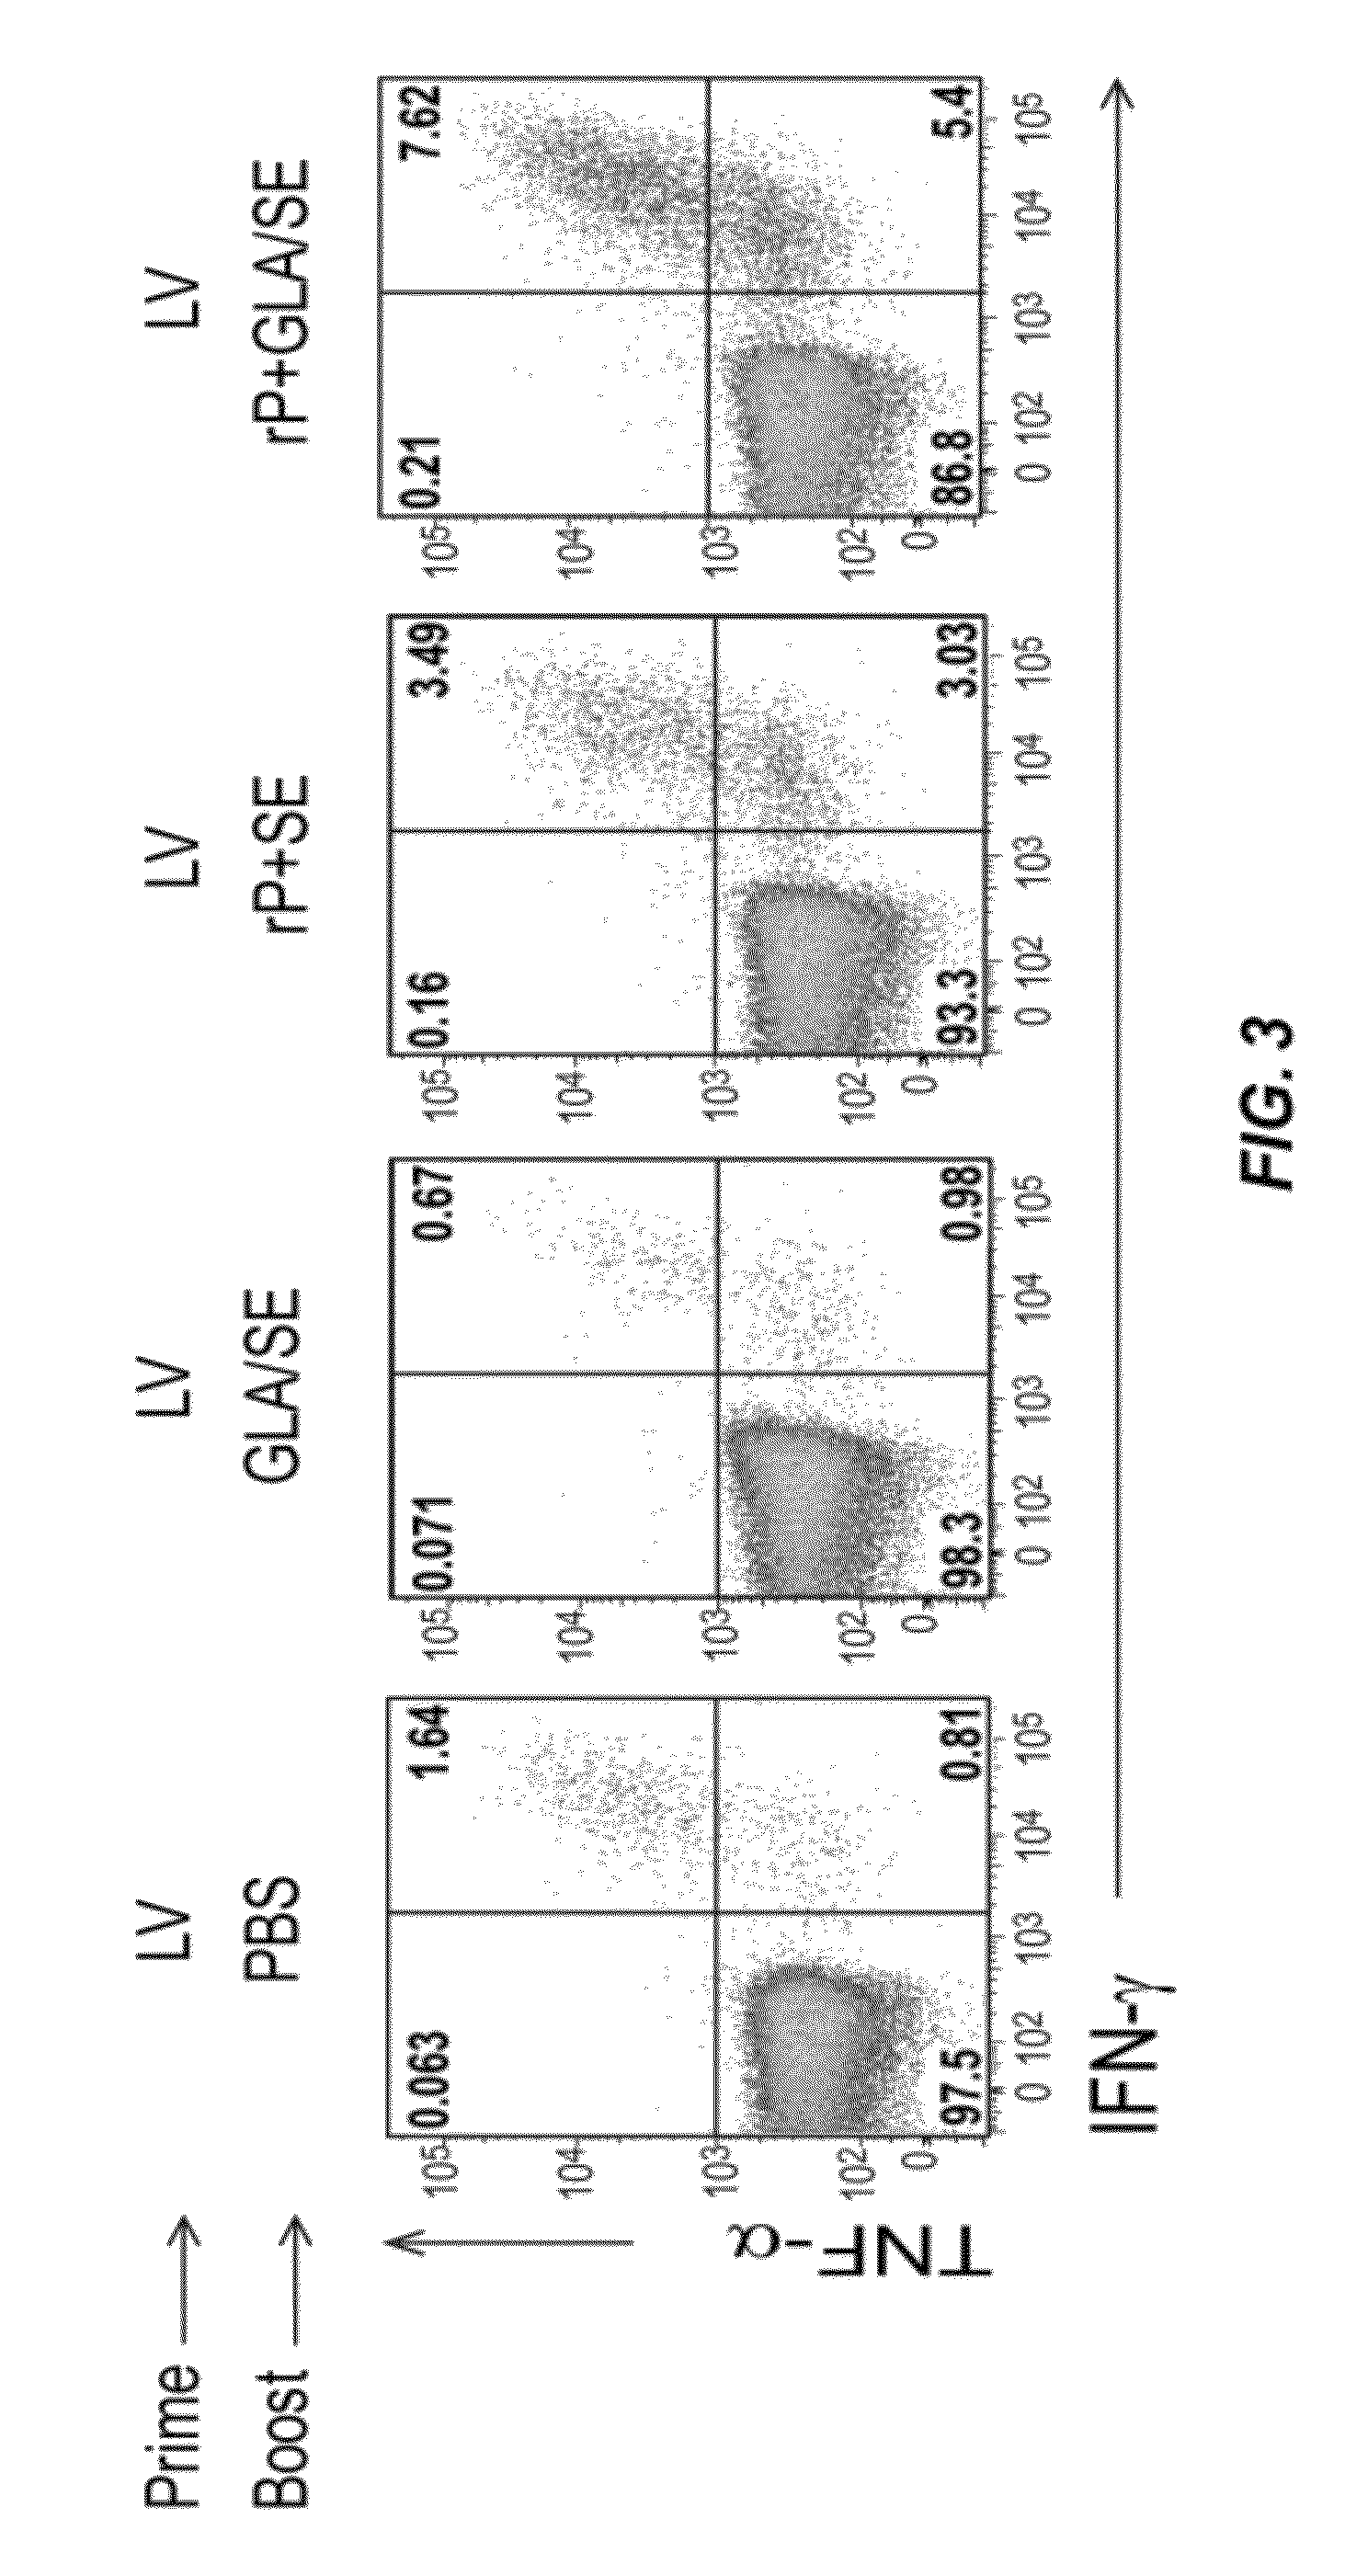 Immunogenic compositions and methods of using the compositions for inducing humoral and cellular immune responses